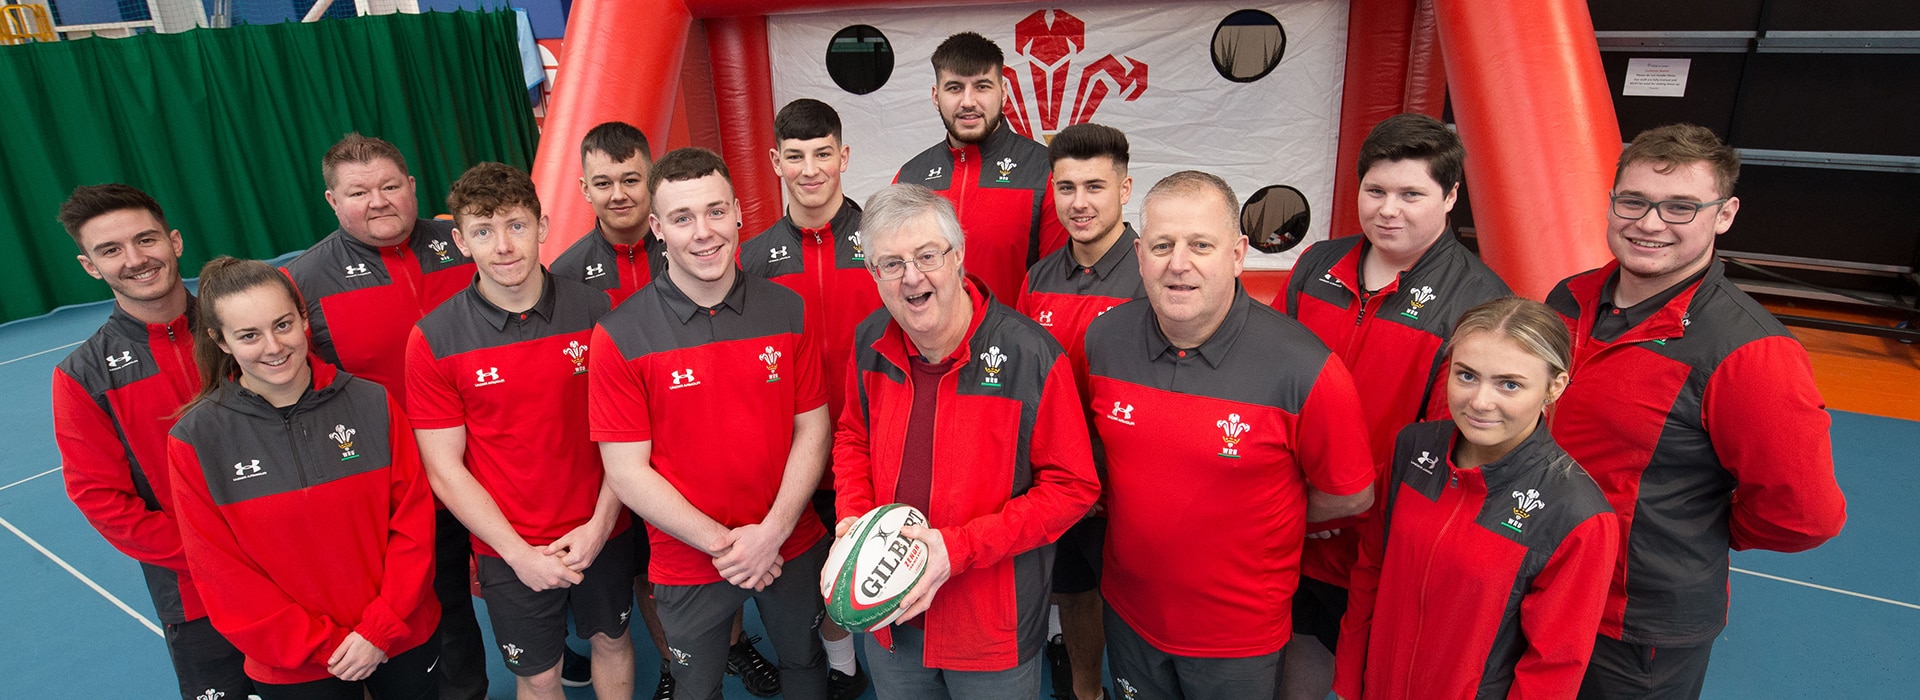 07.02.20 - WRU Apprentices with First Minister and Muslim Faith school students at rugby taster session